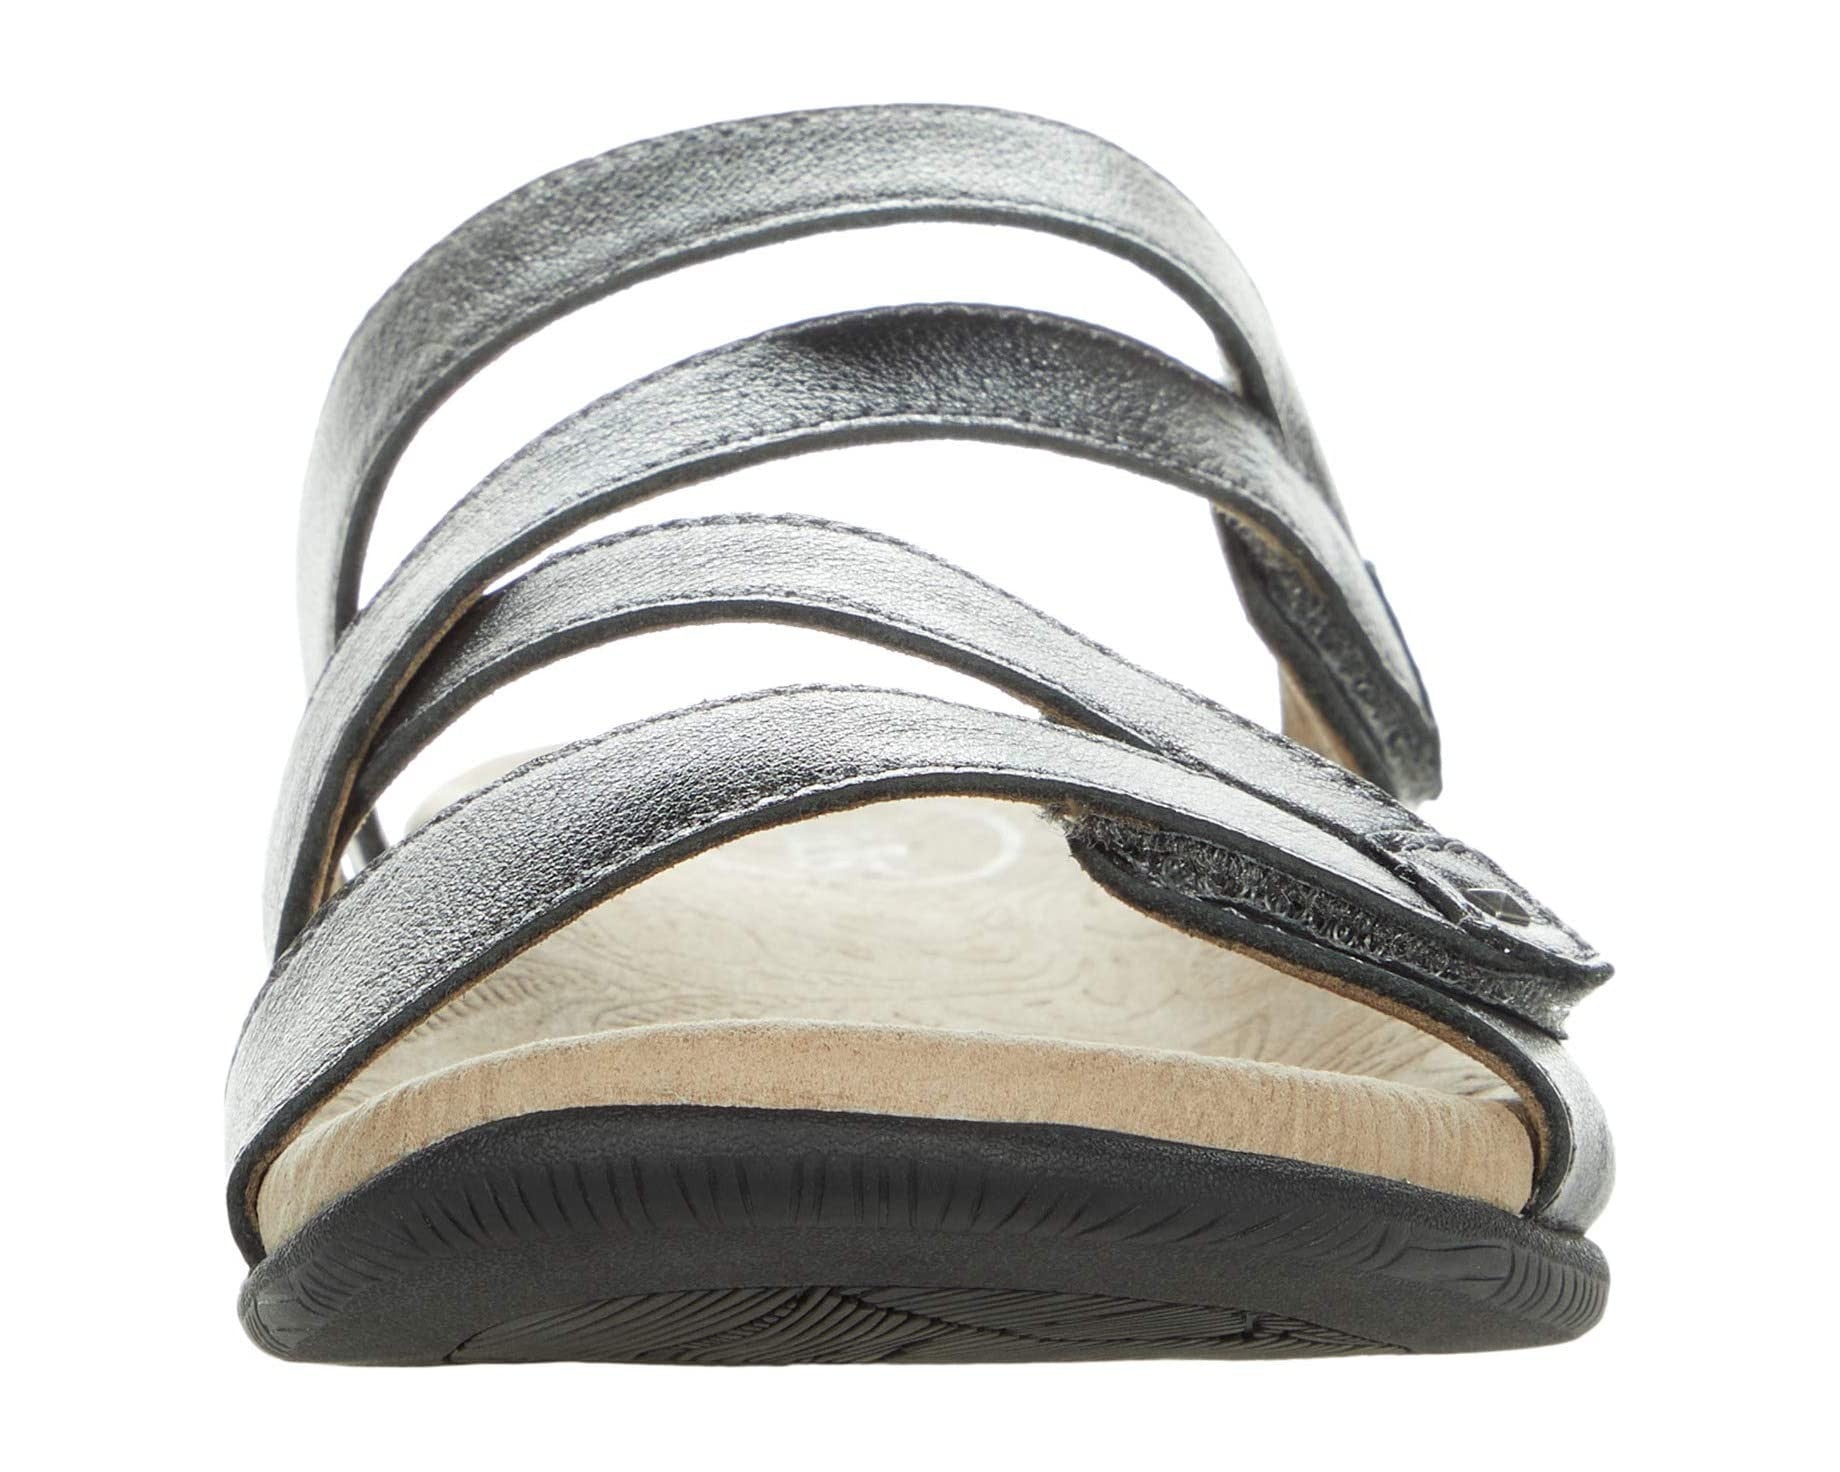 Double U | Leather | Pewter - Sandals - Taos